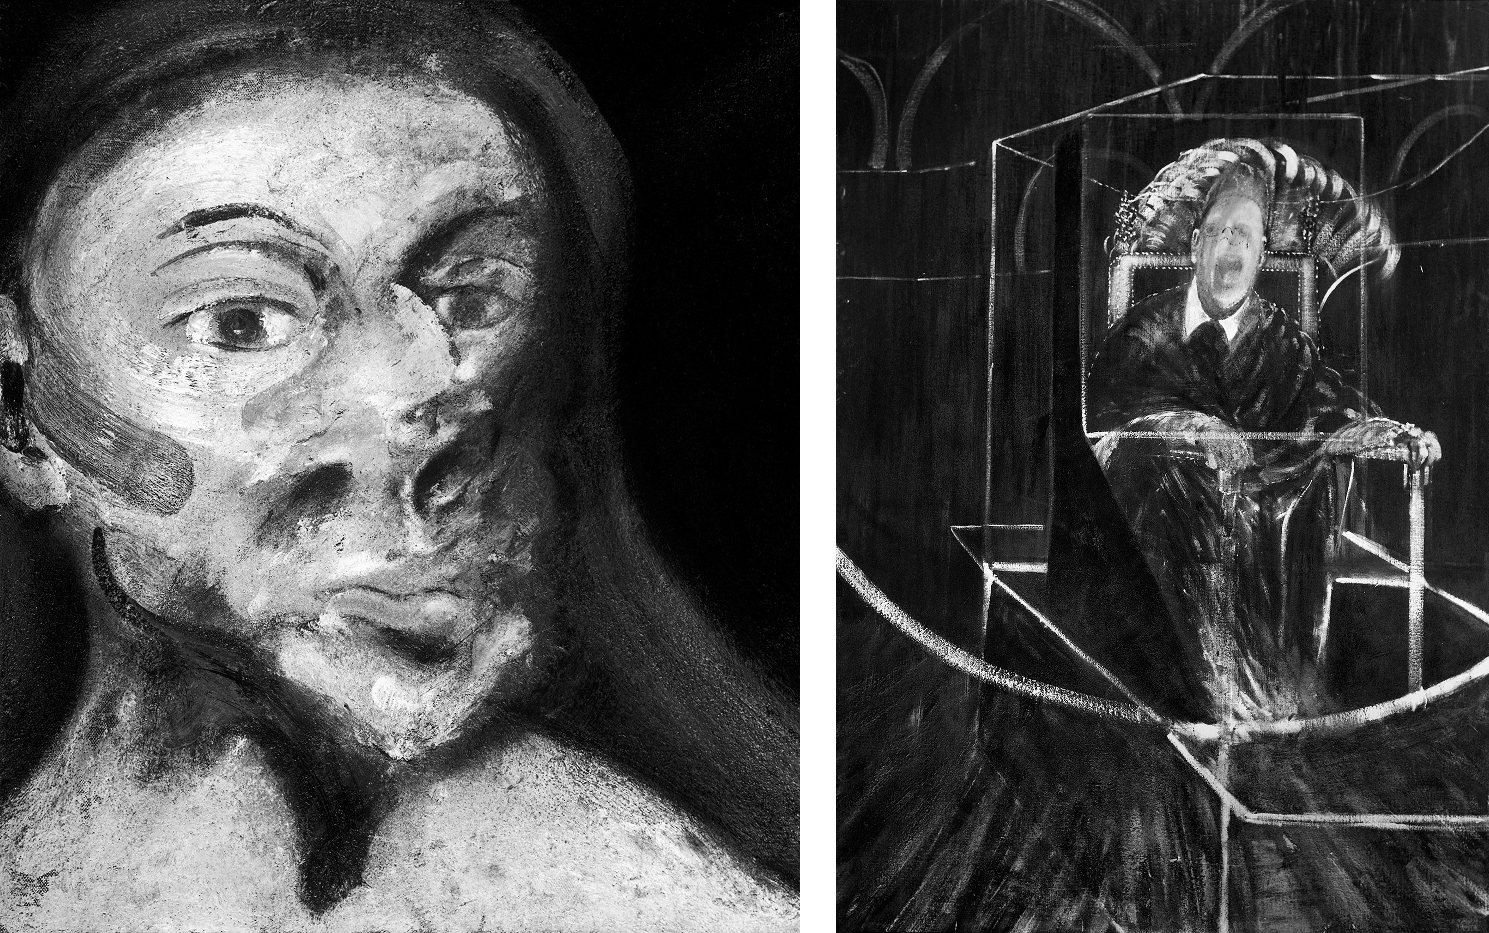 Decorative B&W images: Francis Bacon's Head of Woman, 1961 and Pope III, 1951.